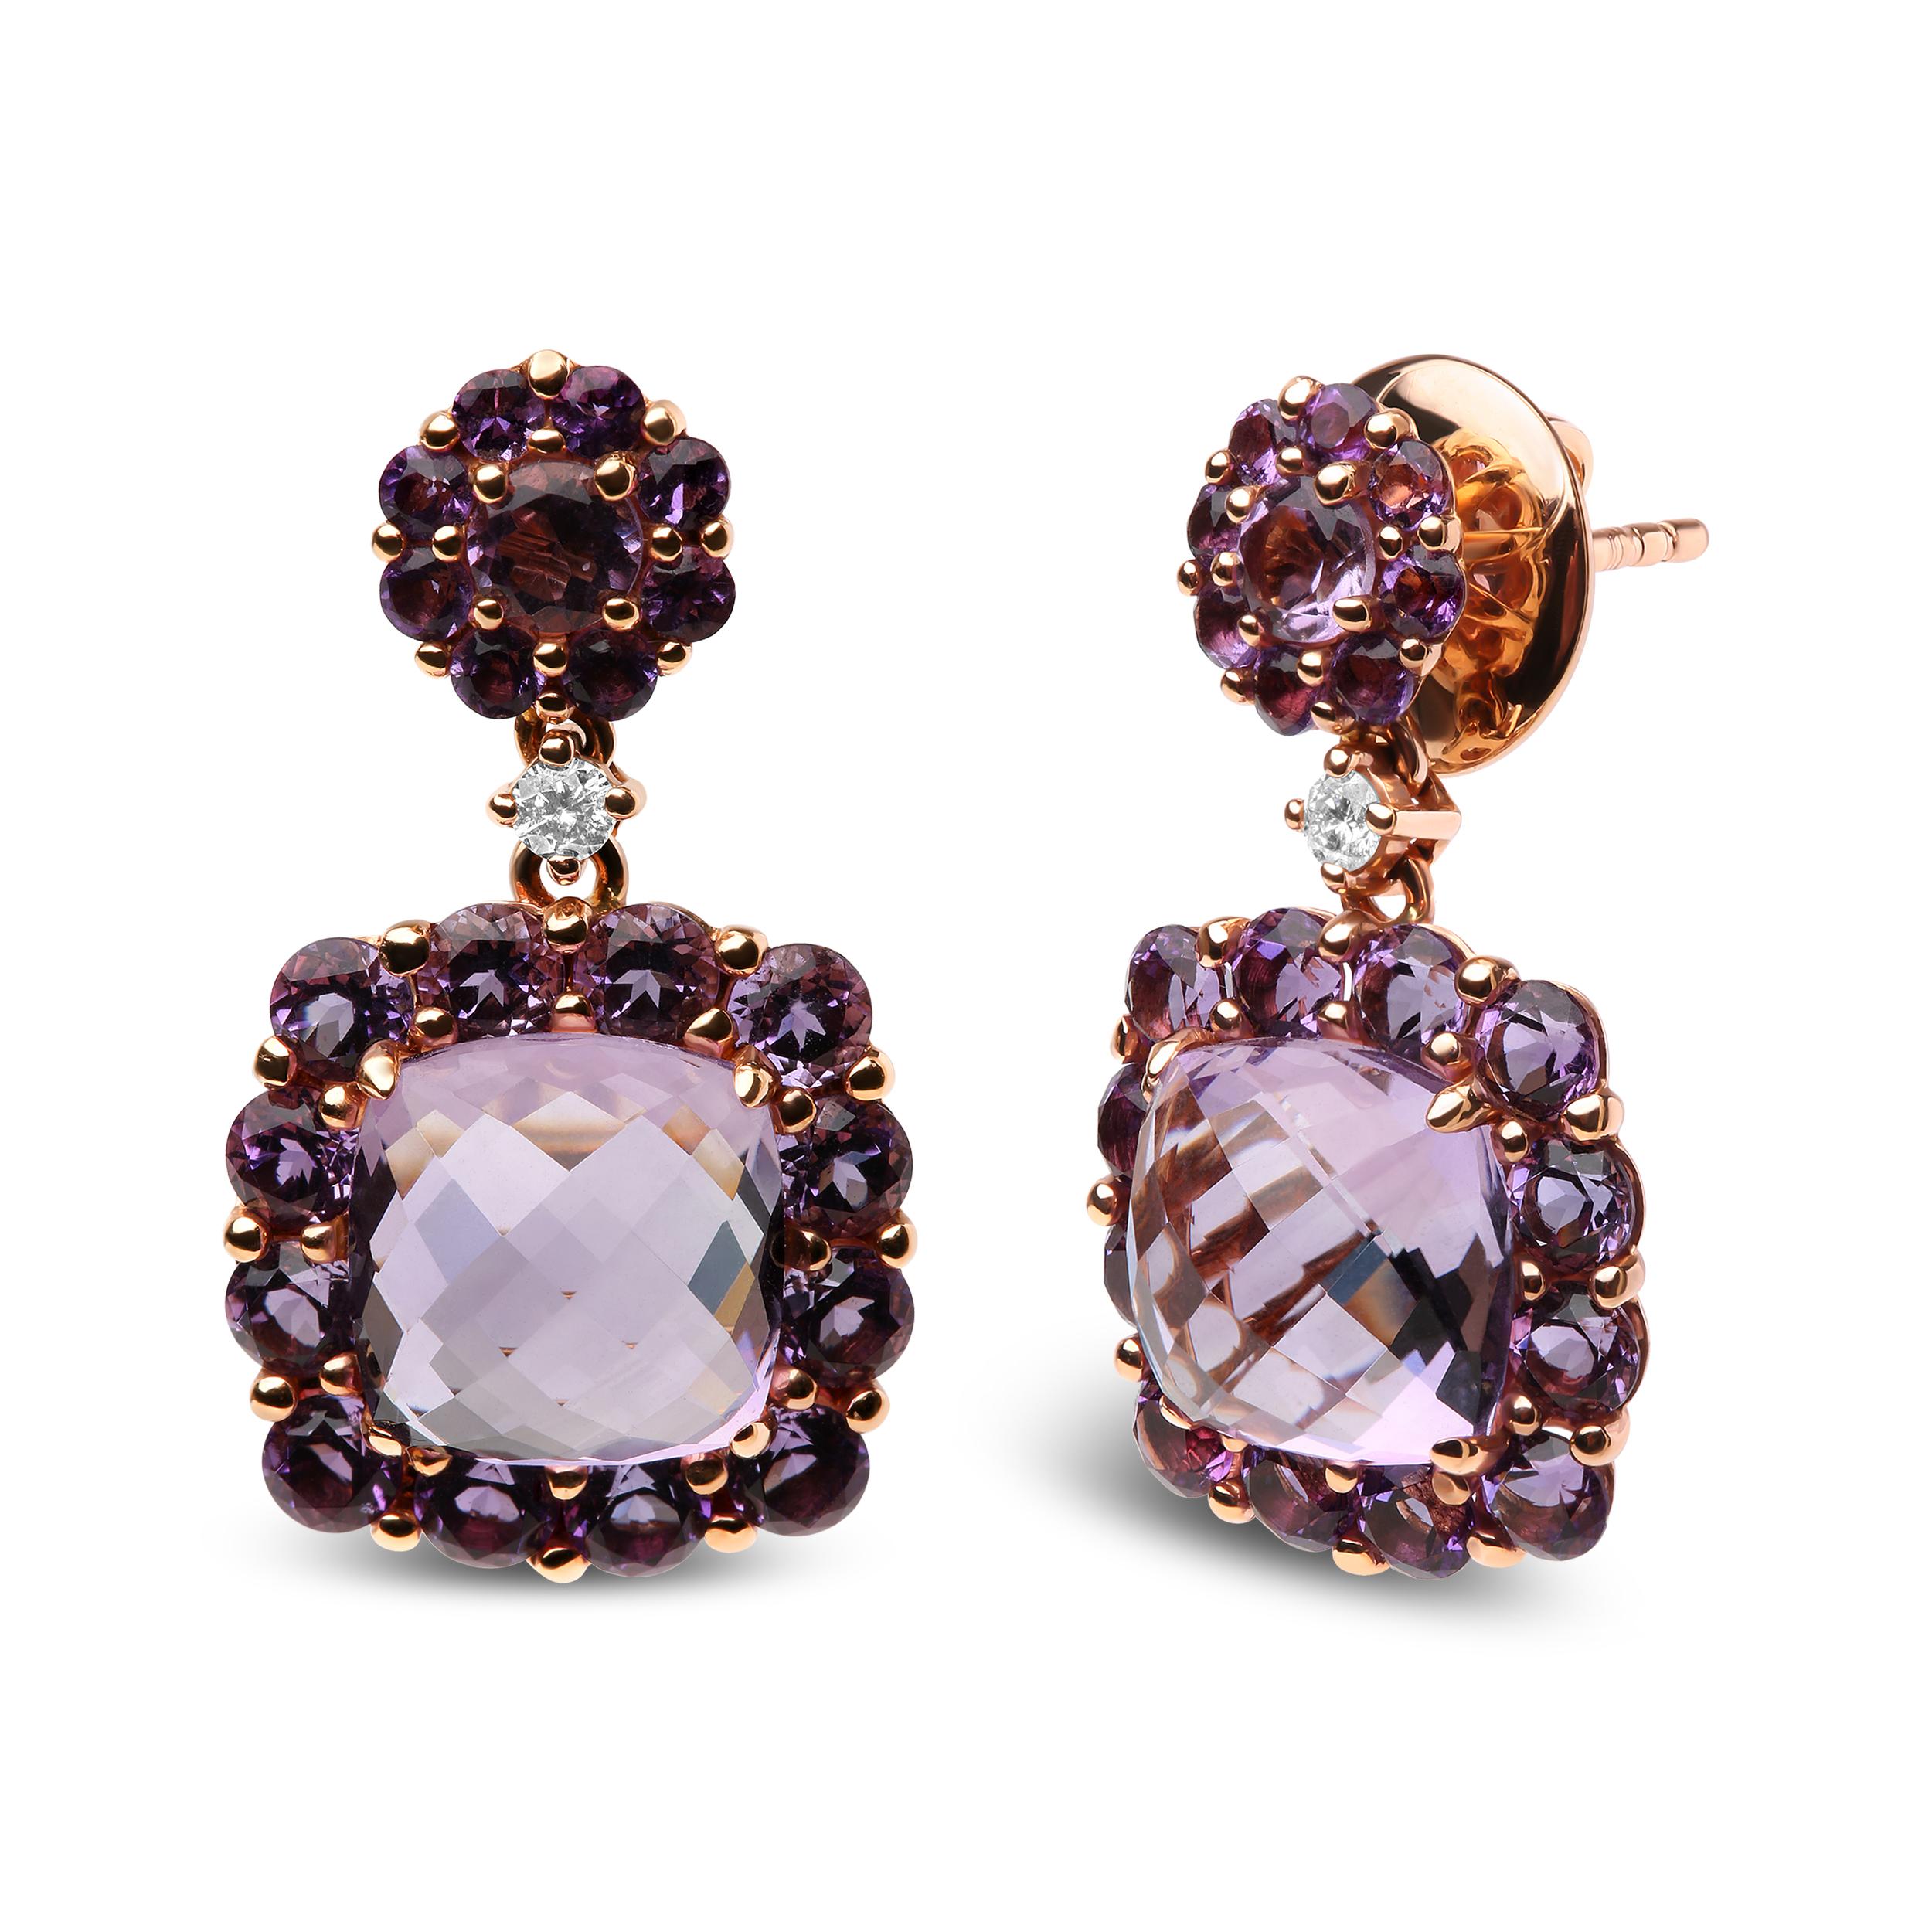 Your adoring audience won't be able to stop from staring at these 18k rose gold dangle drop earrings. The upper dangle takes on a floral silhouette with a natural 3.5mm round heat-treated pink amethyst gemstone in a 4-prong setting haloed by natural